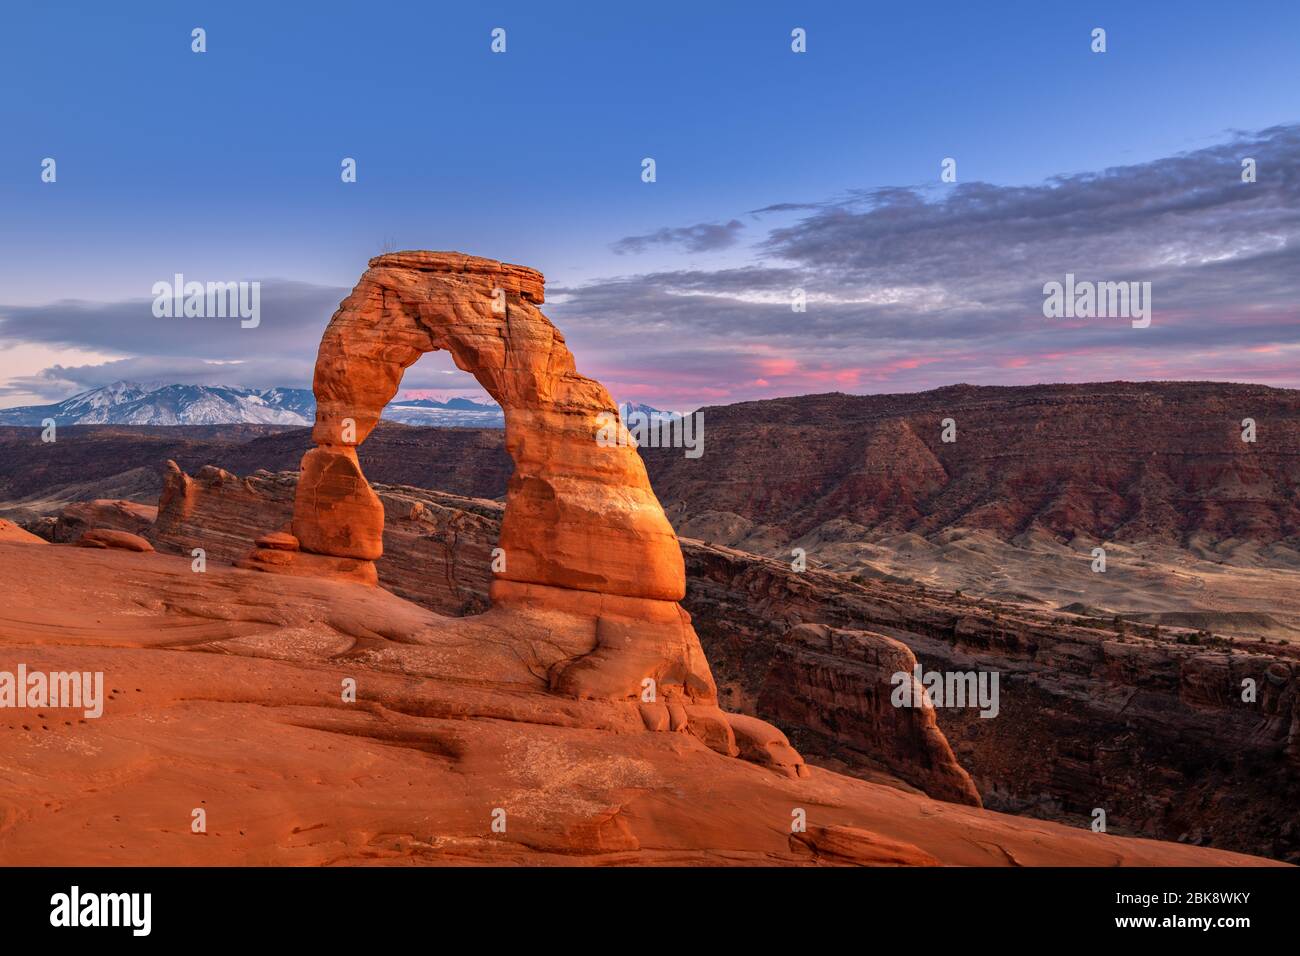 The famous Delicate Arch in Arches National Park of Utah. Stock Photo